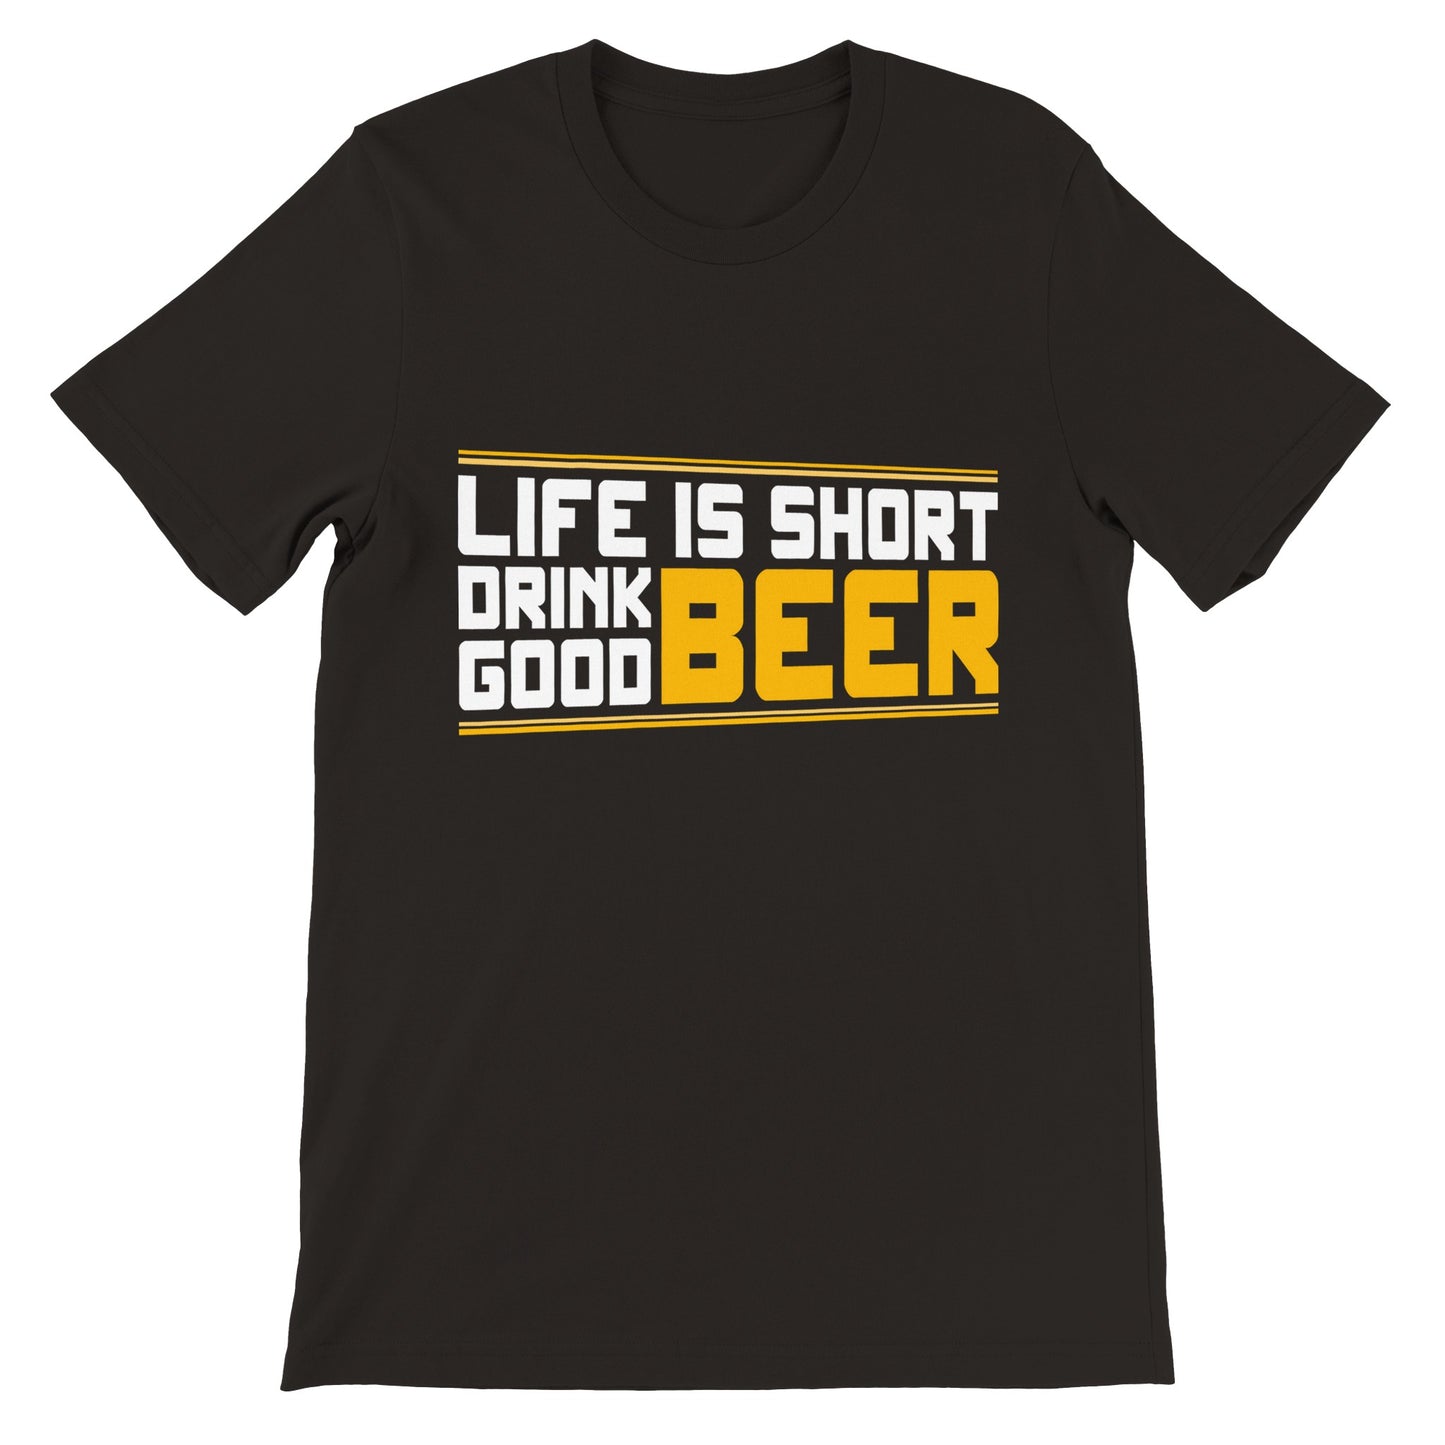 Funny T-Shirts - Life Is Short Drink Good Beer - Premium Unisex T-Shirt 